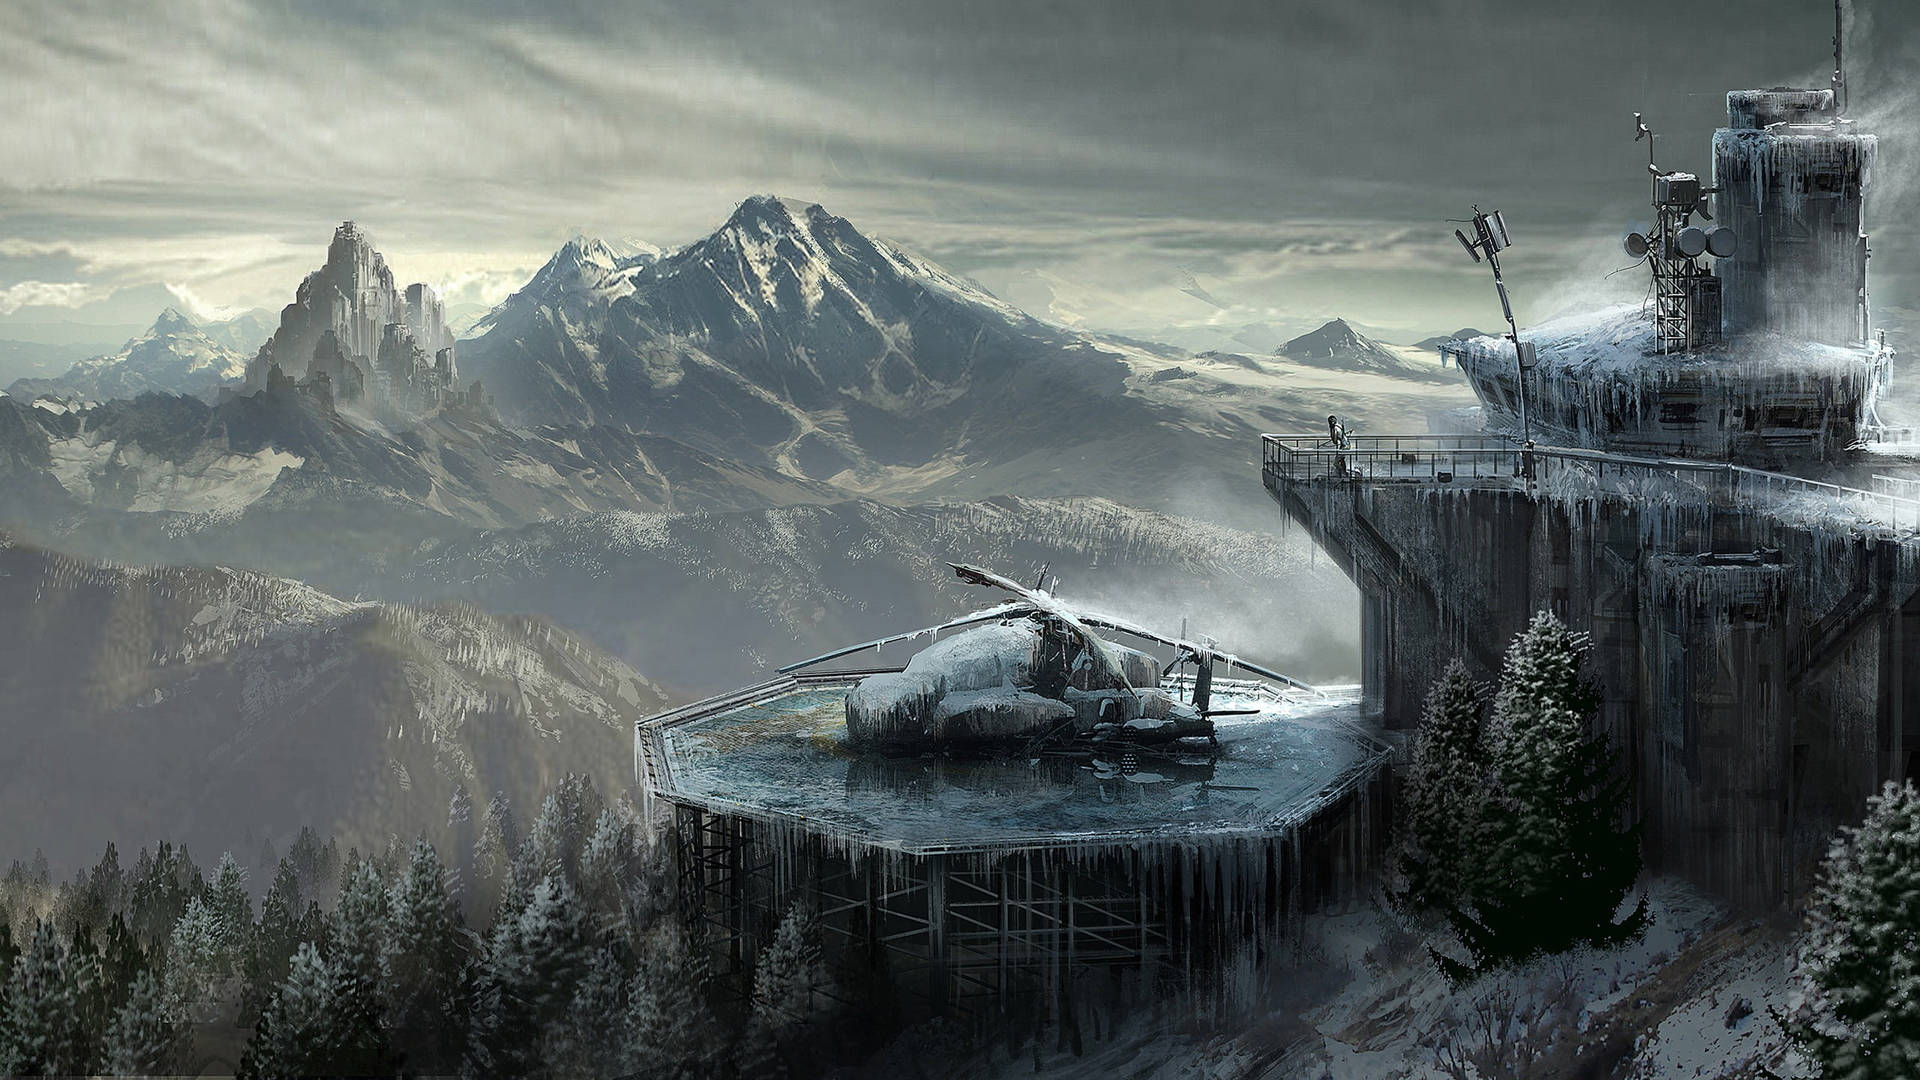 Enigmatic Lara Croft In The Icy Wilderness Of Rise Of The Tomb Raider Background